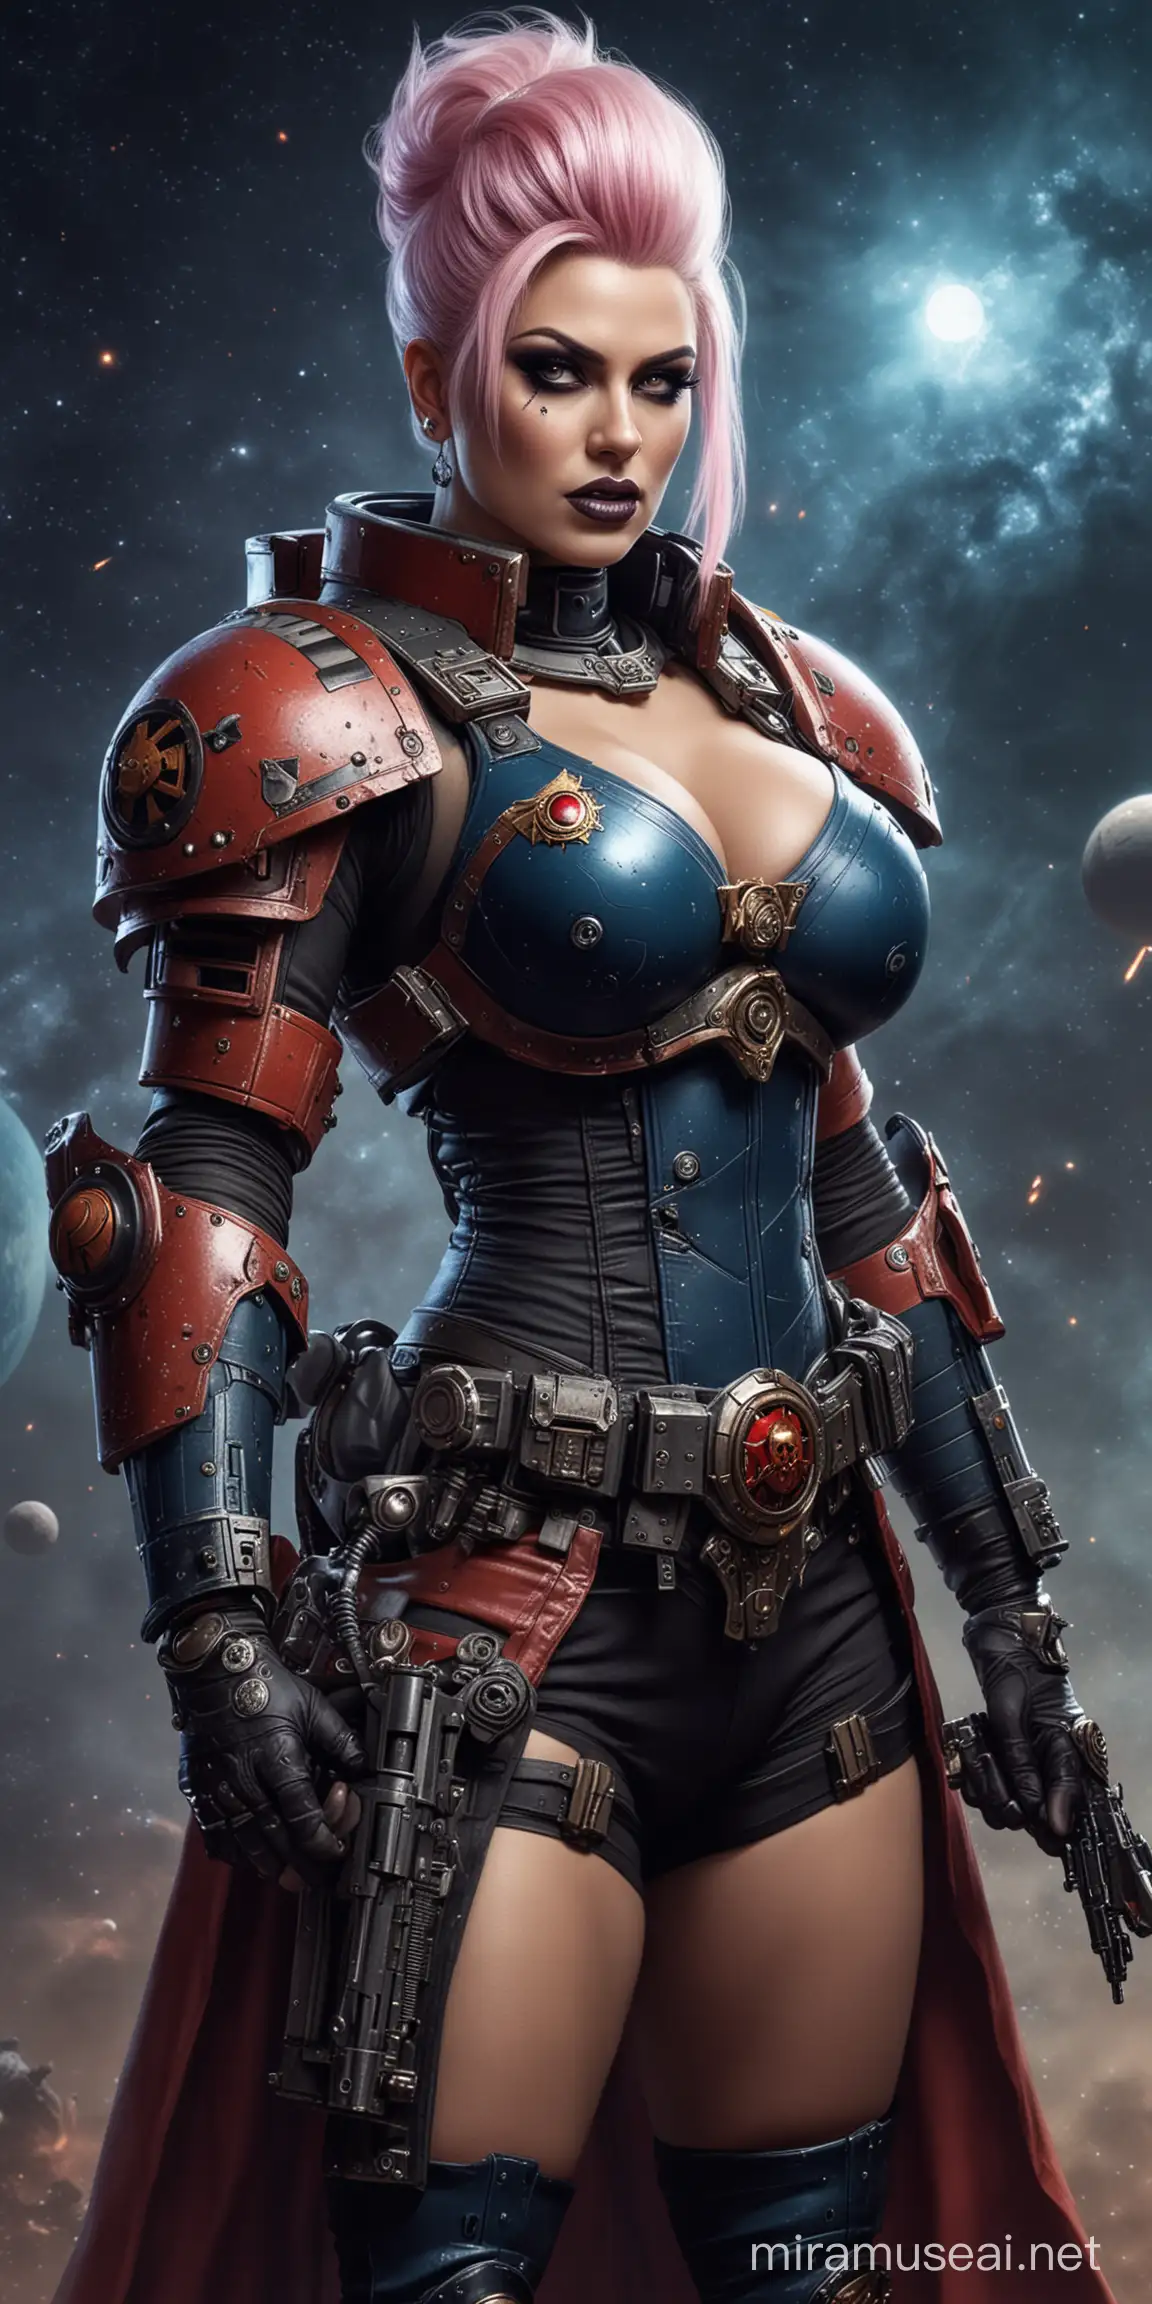 Fierce Drag Queen Space Marine Conquering the Cosmos